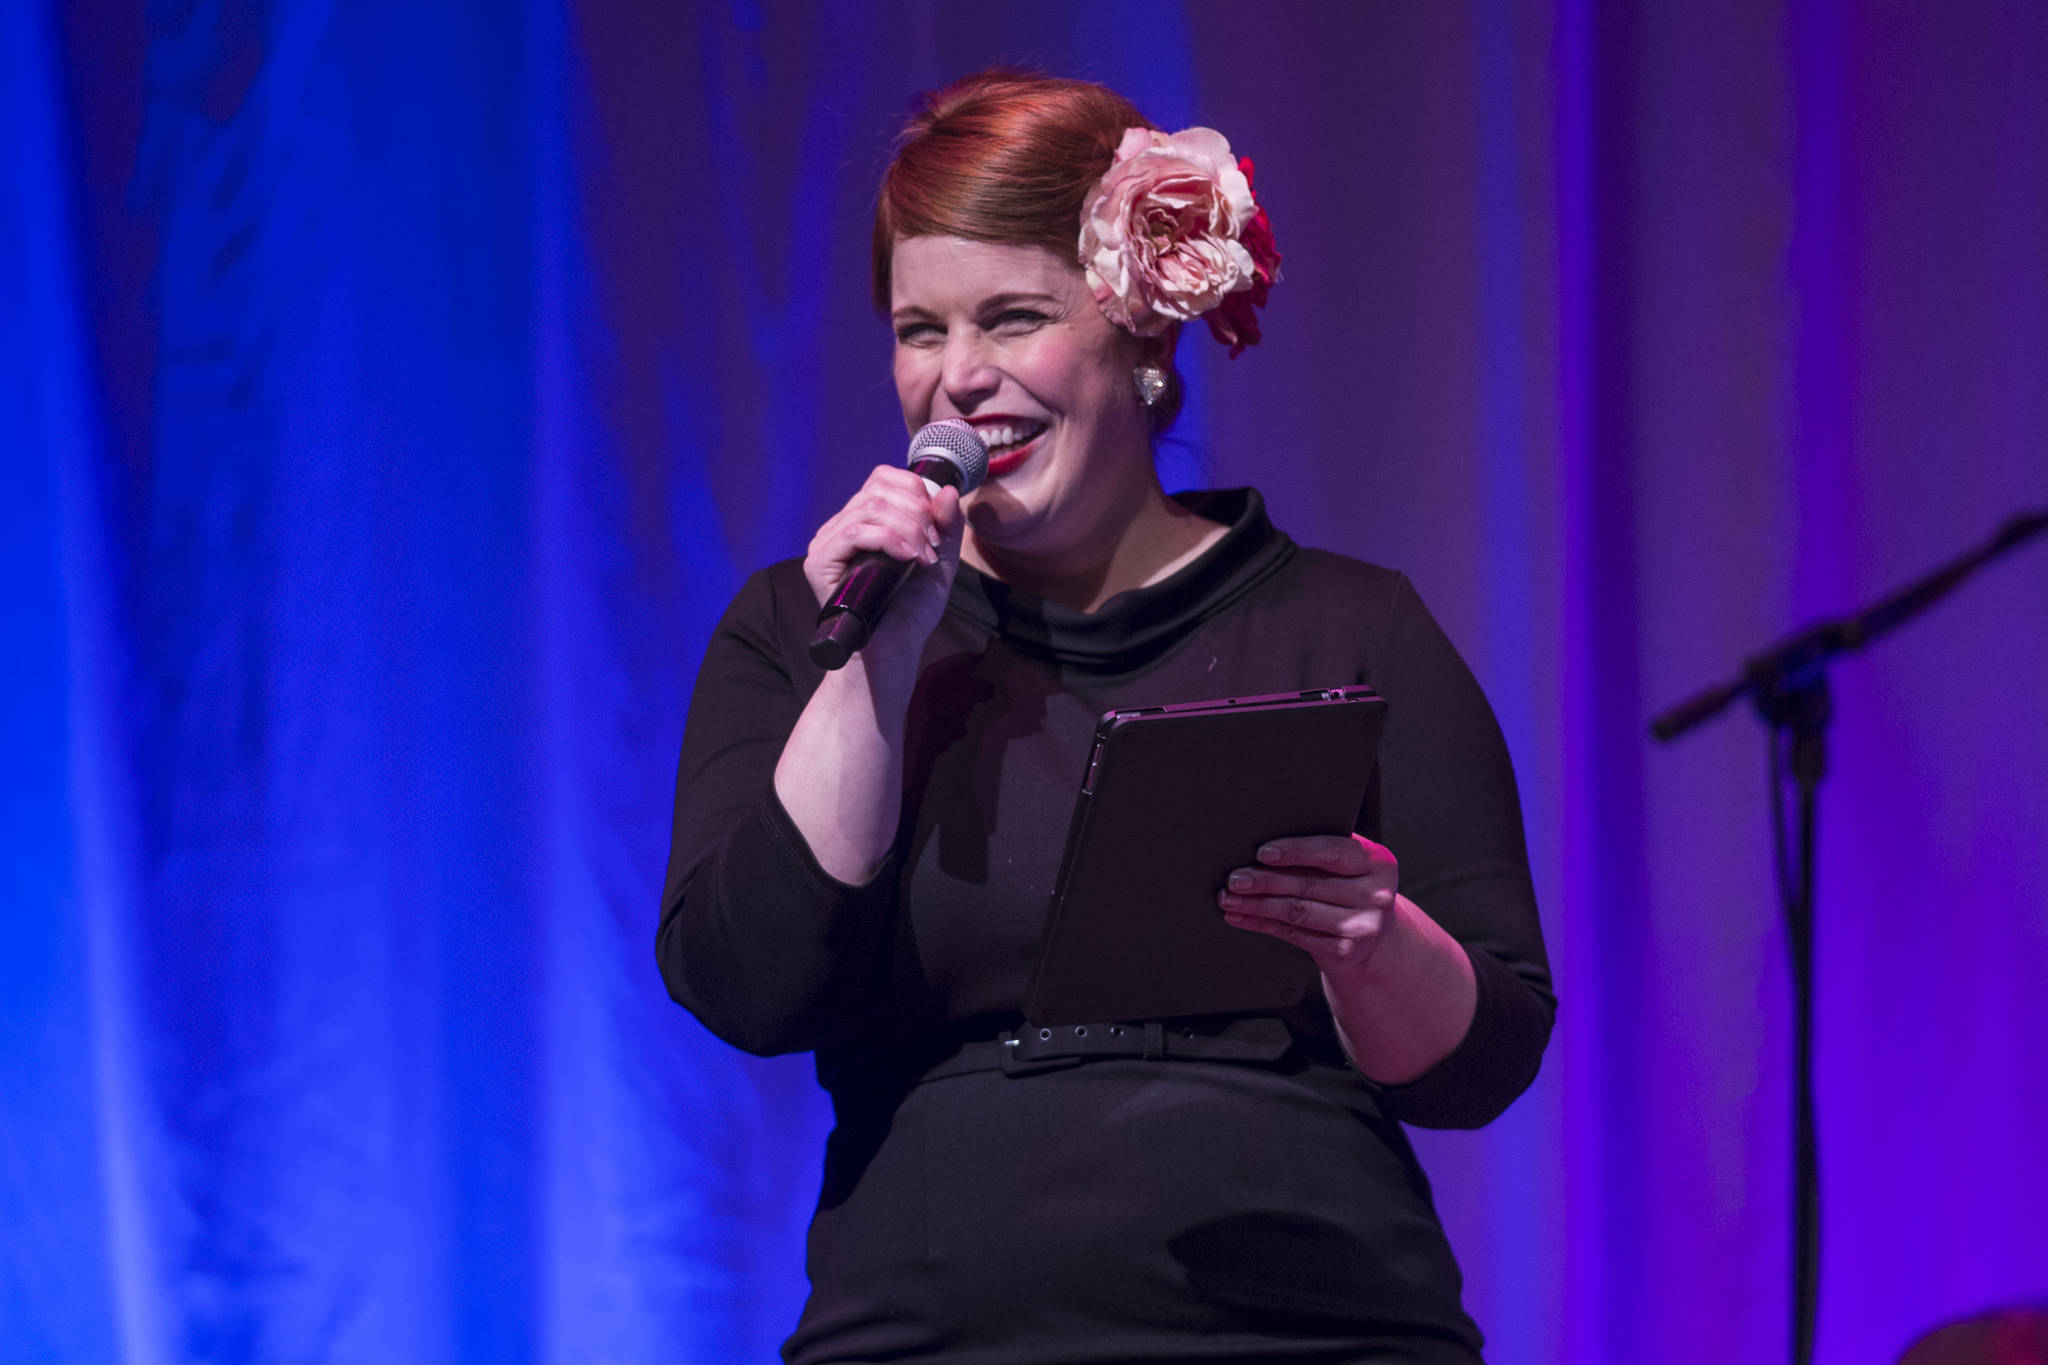 Margeaux Ljungberg performs Mistress of Ceremony duties at Juneau Lyric Opera’s production of “Who’s Your Diva?” at Centennial Hall on Saturday, Sept. 29, 2018. (Michael Penn | Juneau Empire)